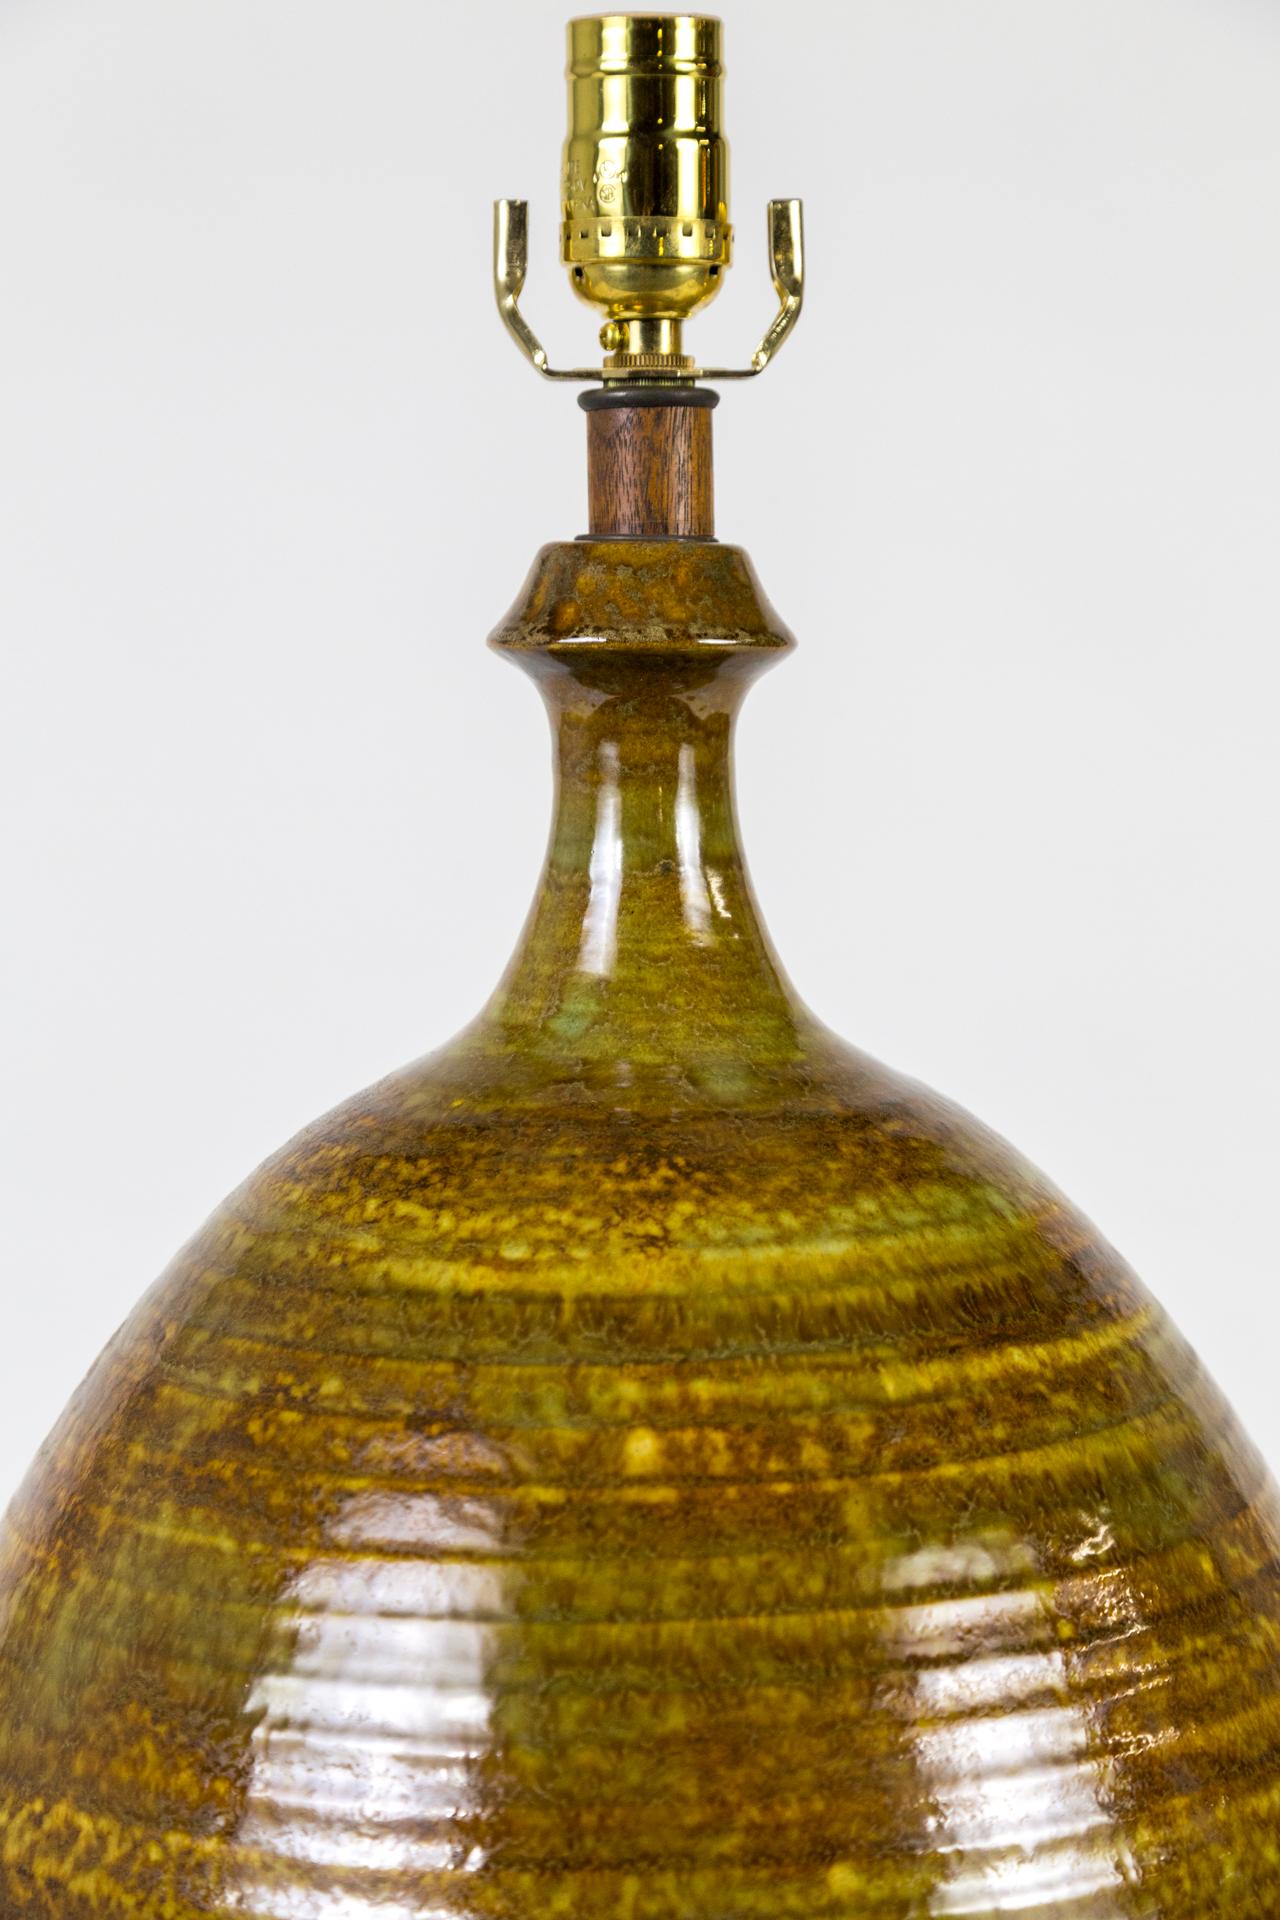 A large, egg shaped, ceramic lamp with horizontal ribs with golden umber and olive green glaze. Accented with wood base and neck, 1970s. Newly rewired. Measures: 27